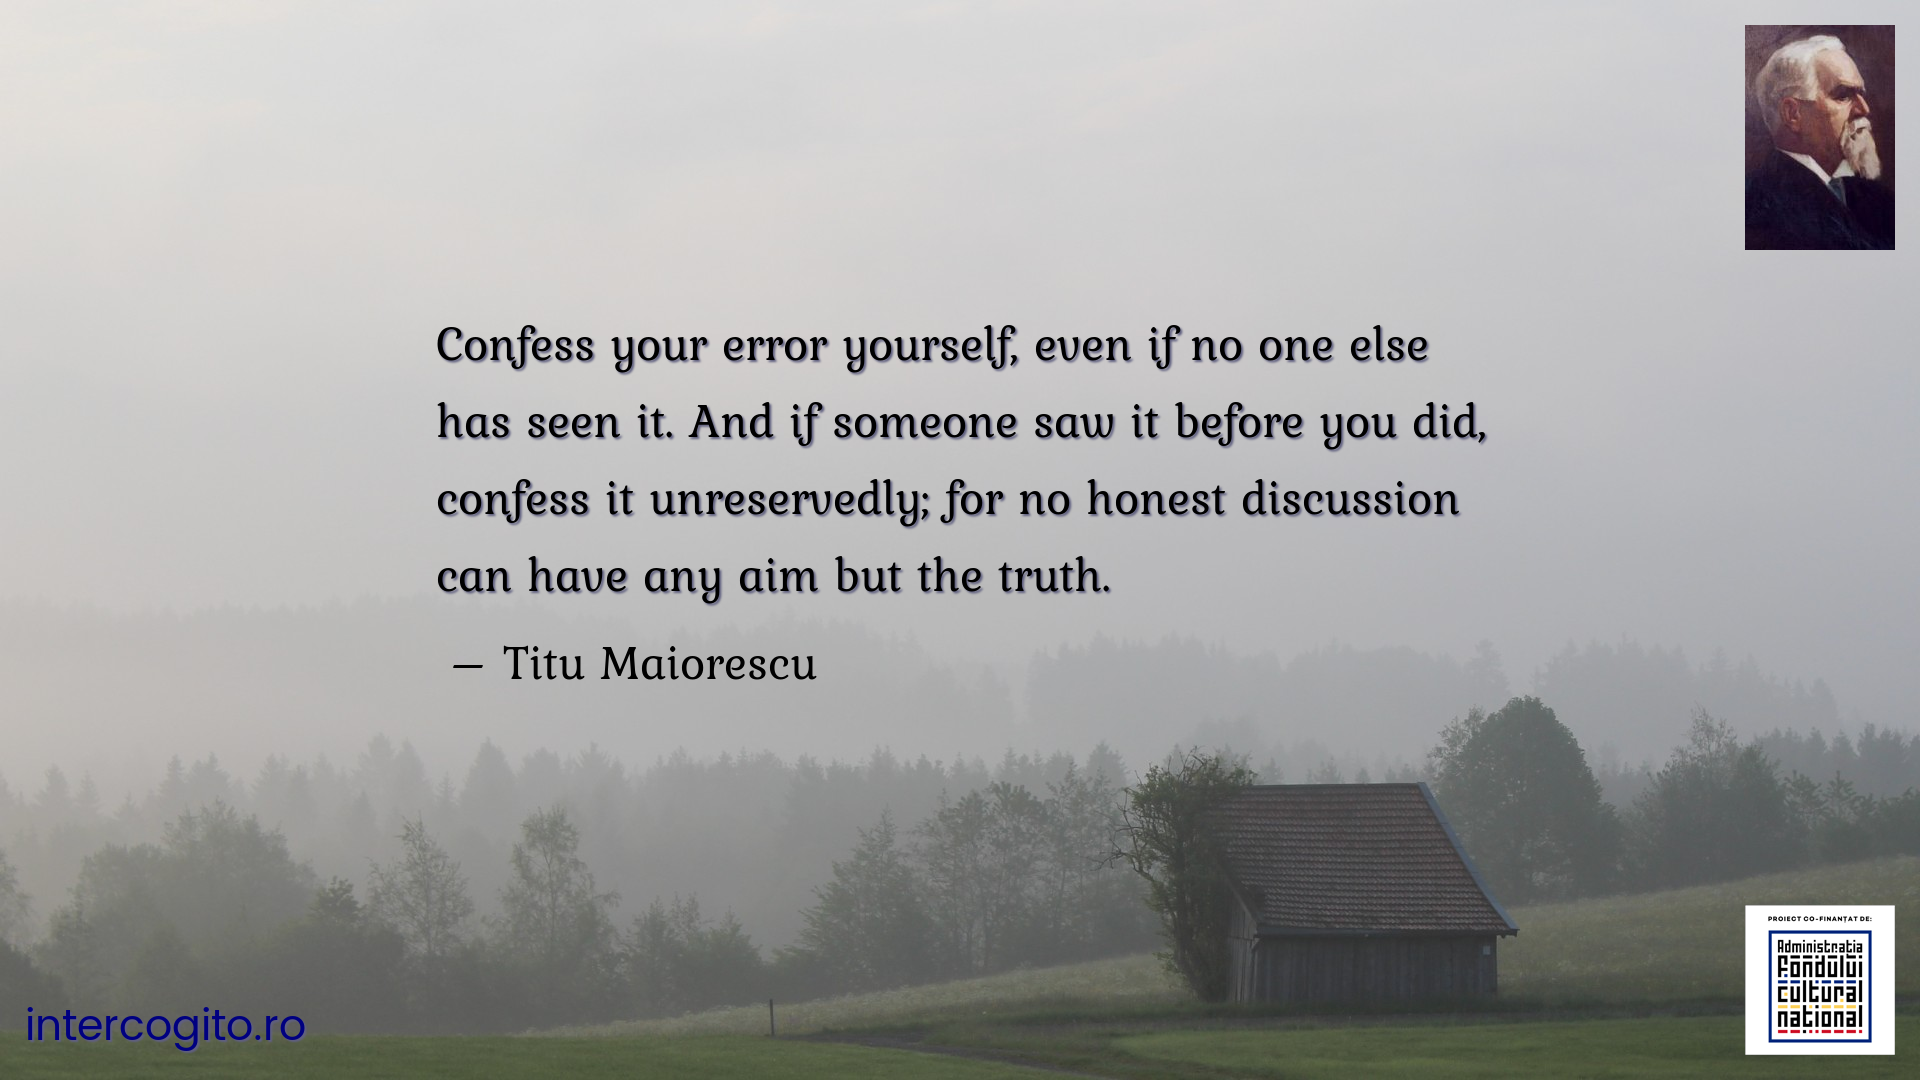 Confess your error yourself, even if no one else has seen it. And if someone saw it before you did, confess it unreservedly; for no honest discussion can have any aim but the truth.